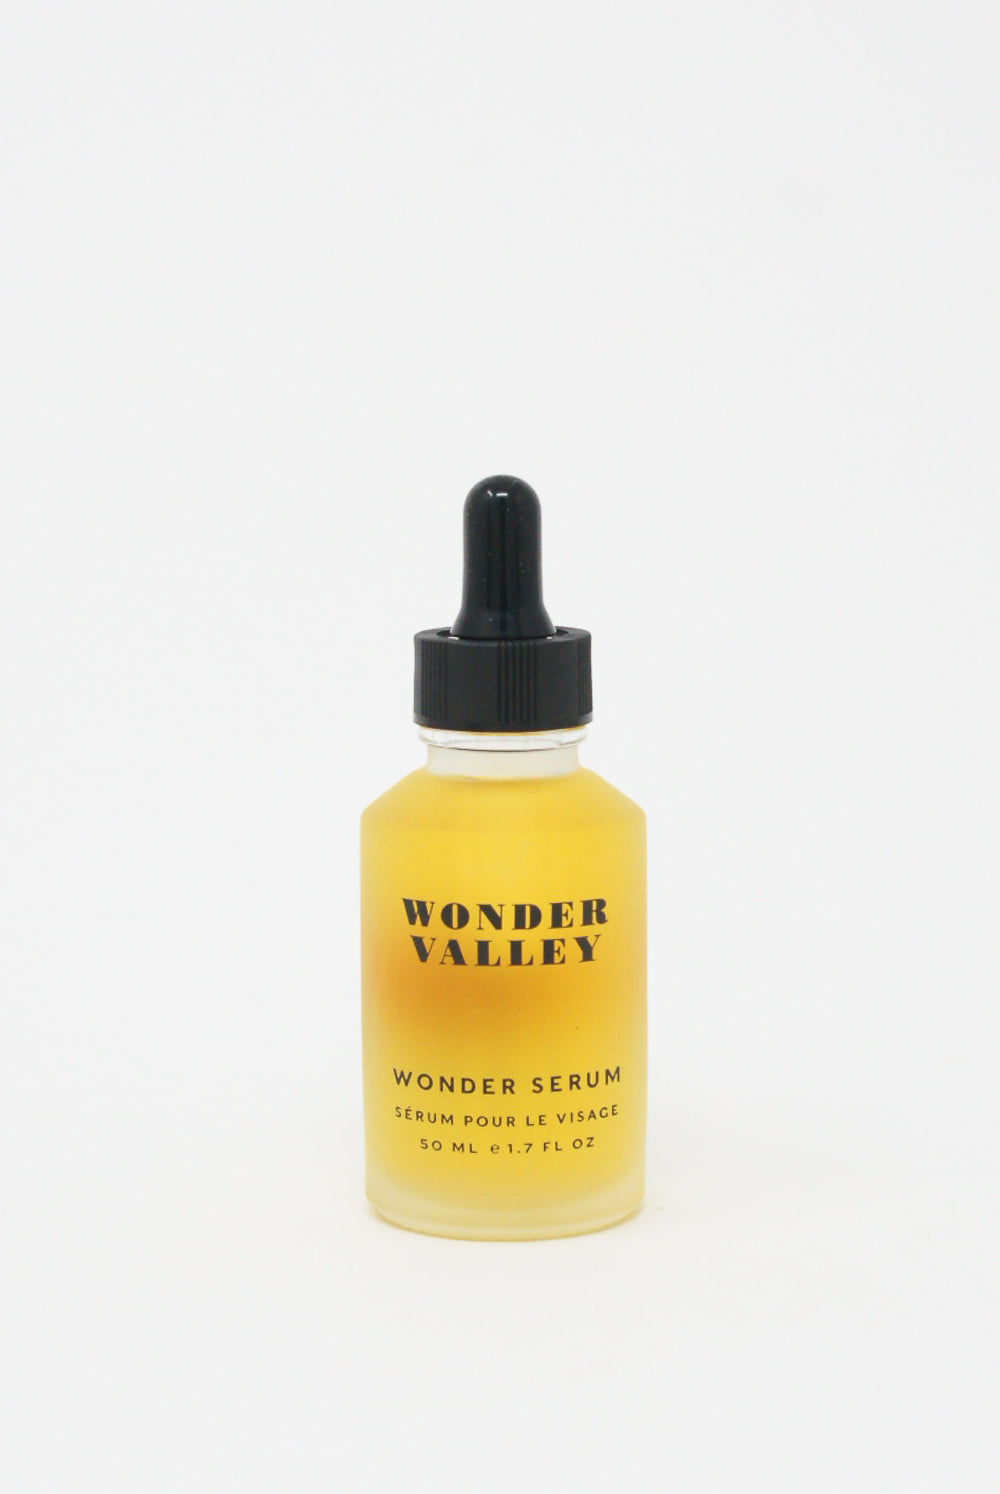 A bottle of Wonder Serum, enriched with bioactive peptides and hyaluronic acid, showcased on a pristine white background.